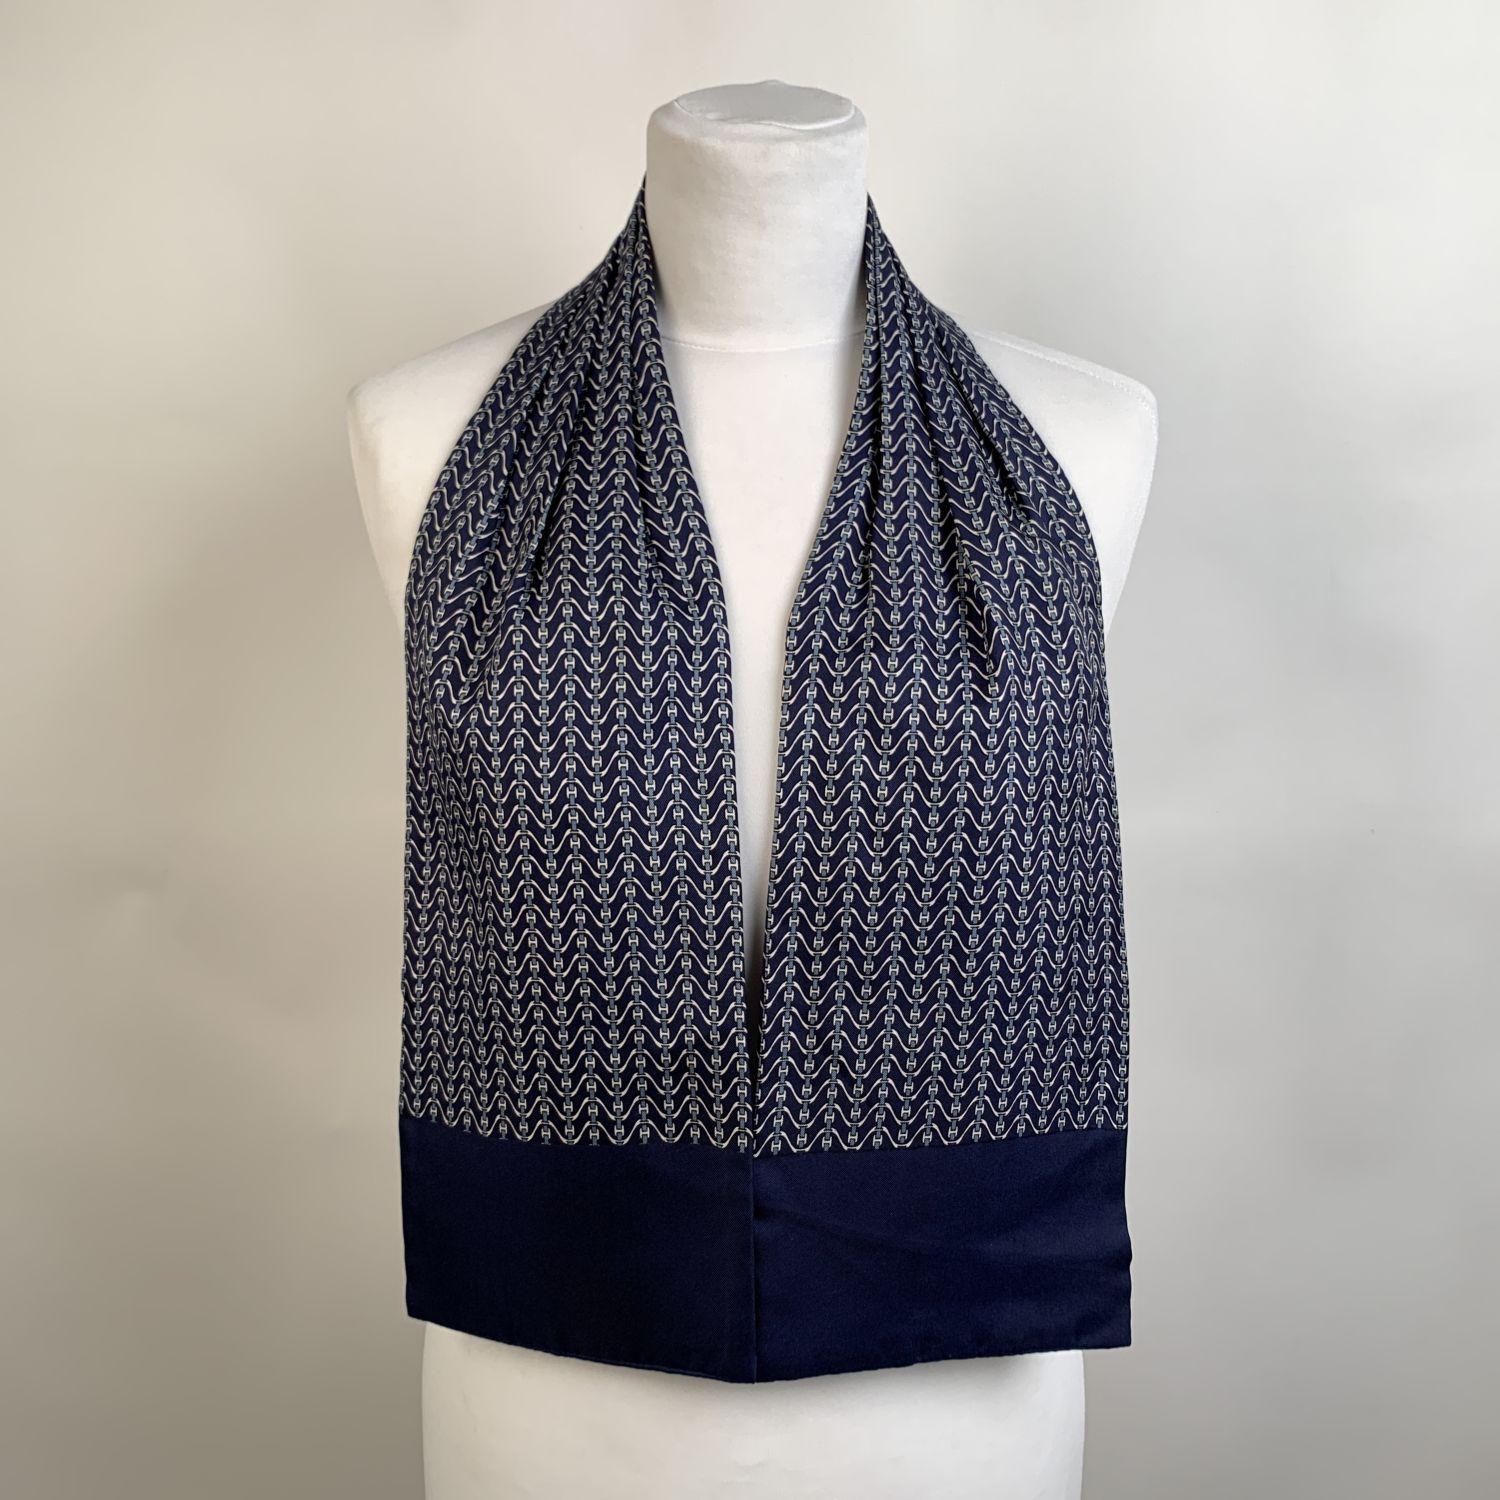 Sophisticated ascot scarf by HERMES, featuring H/buckle pattern on blue background. Pleated,stitched center section. Both suitable for man or woman can be worn in many different ways: as an ascot, at neck, in hair, as a belt or tied on your bag.